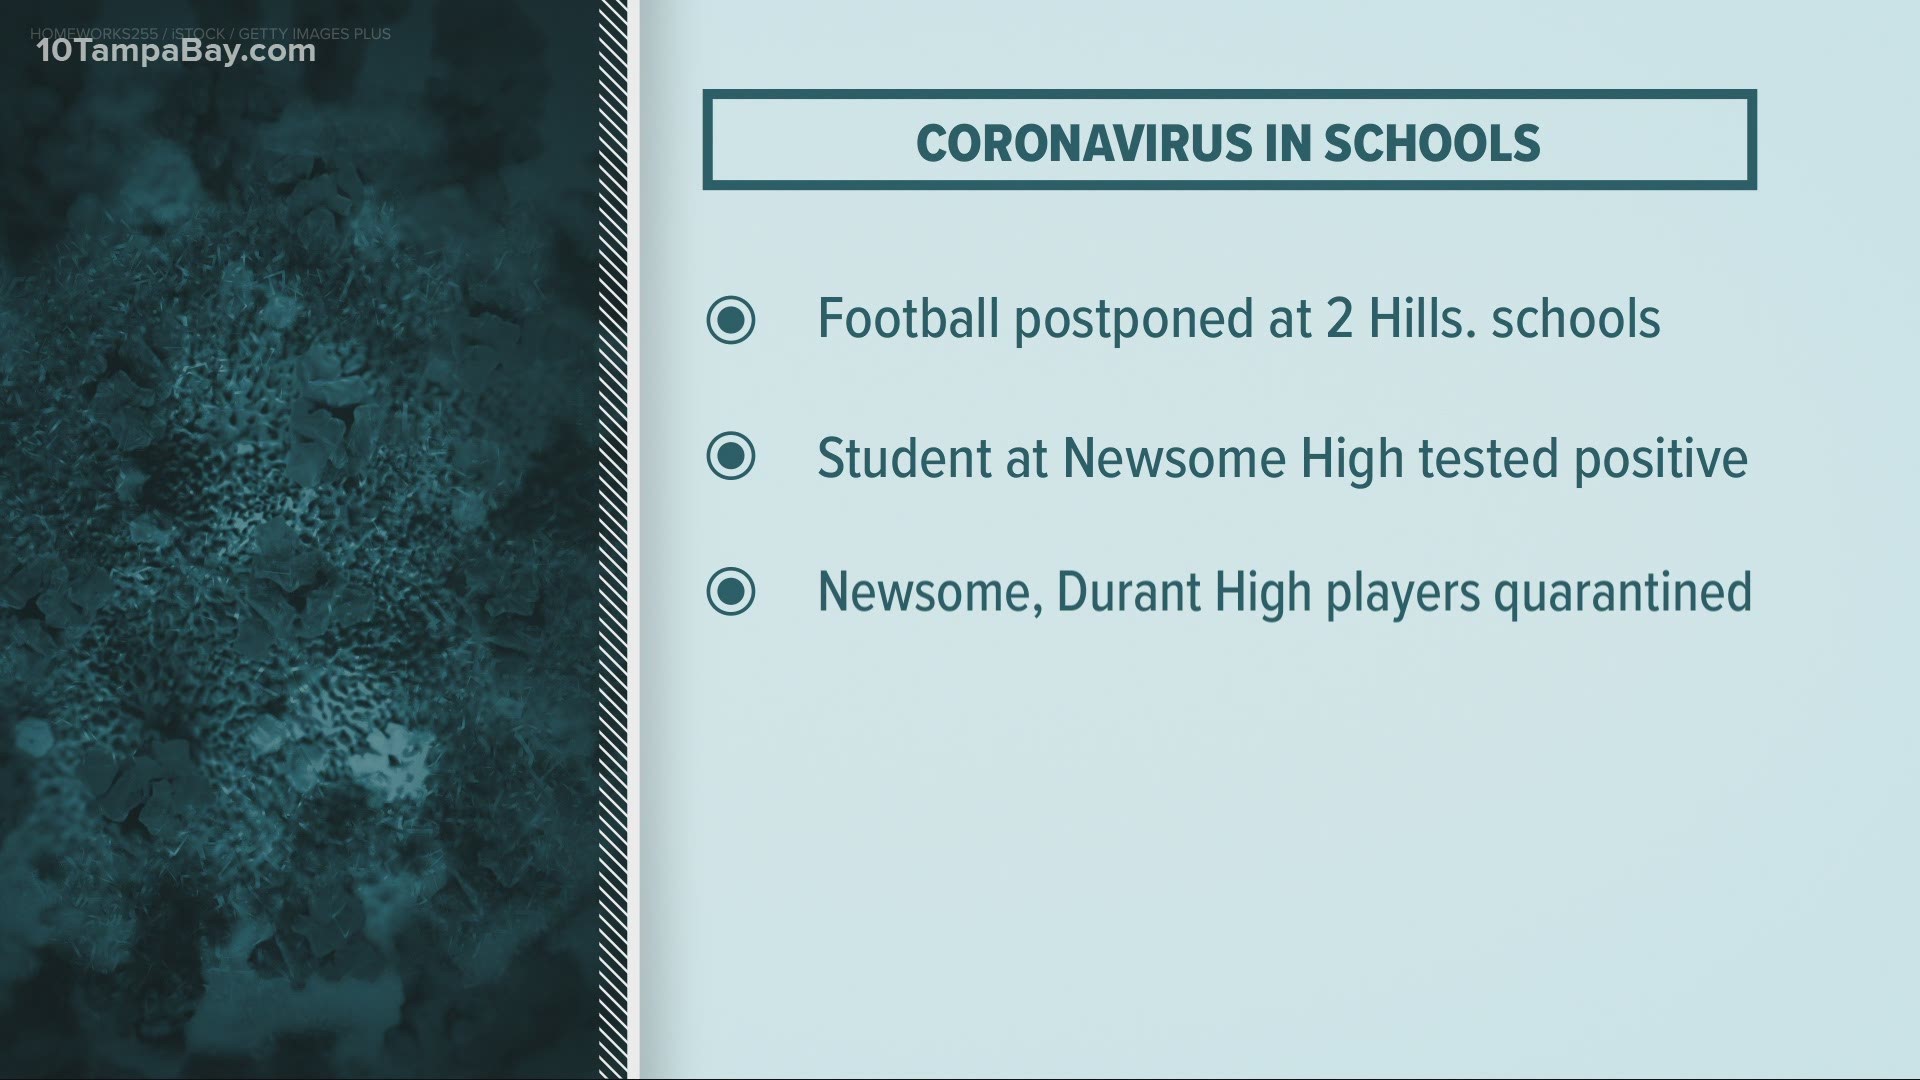 According to a representative from the district, some students on both schools' football teams have been quarantined.